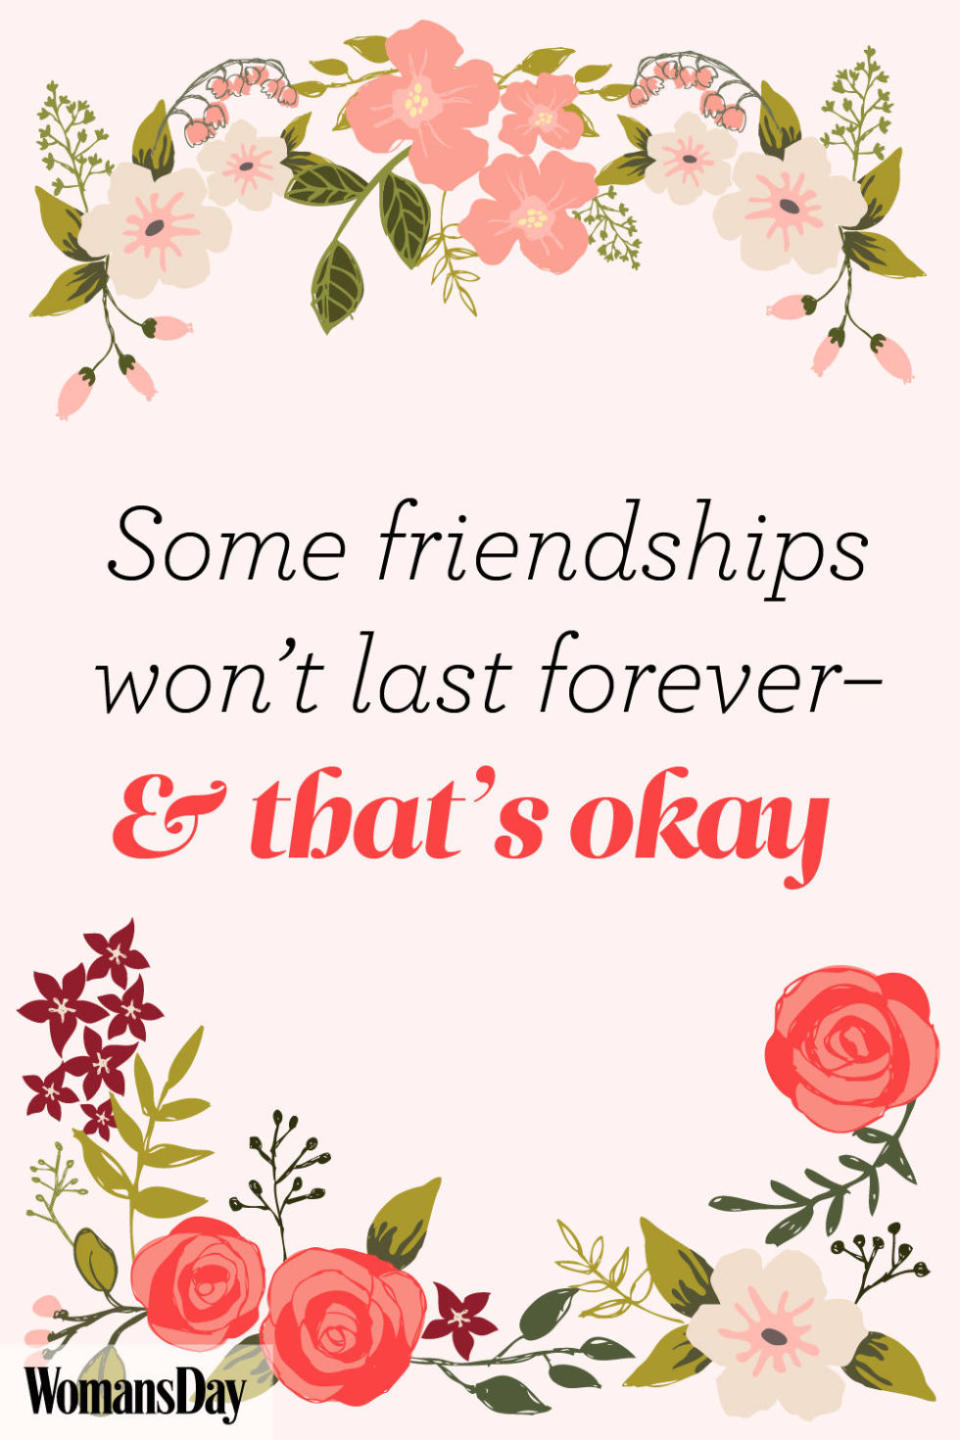 Some friendships won't last forever—and that's okay.